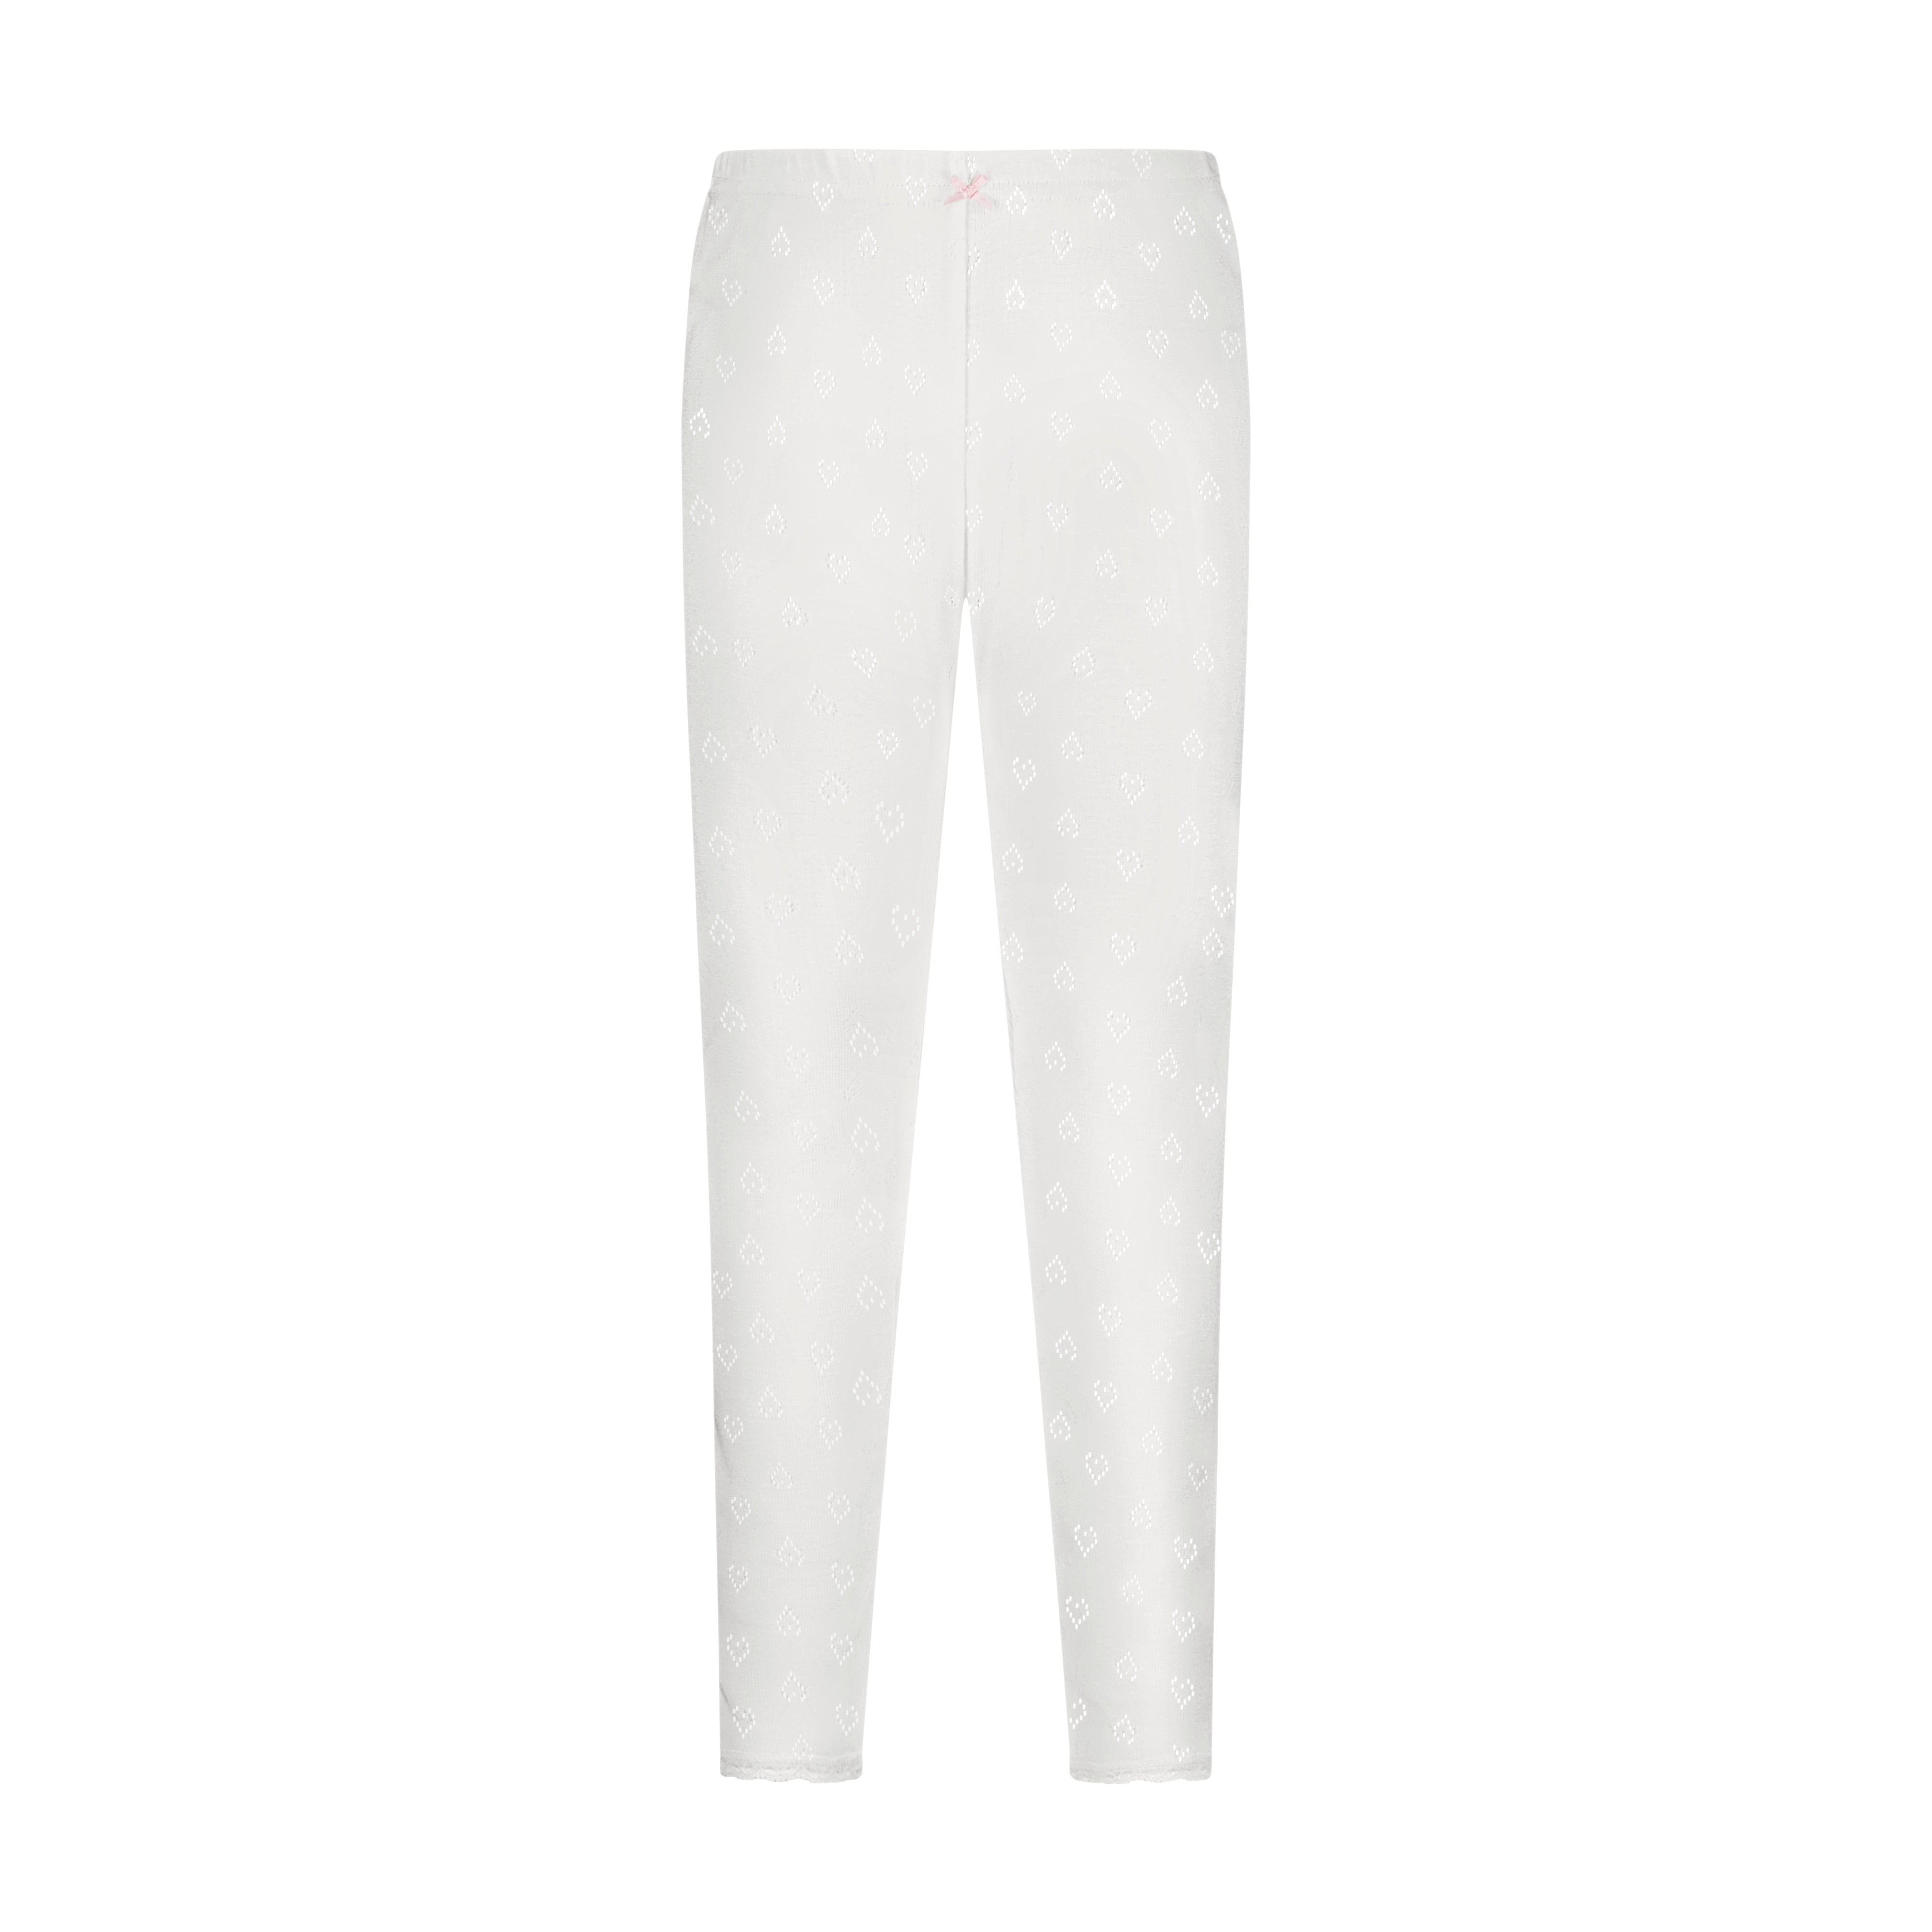 GIRLS & BABY PANT Pearl White Vintage Hearts -Restocked